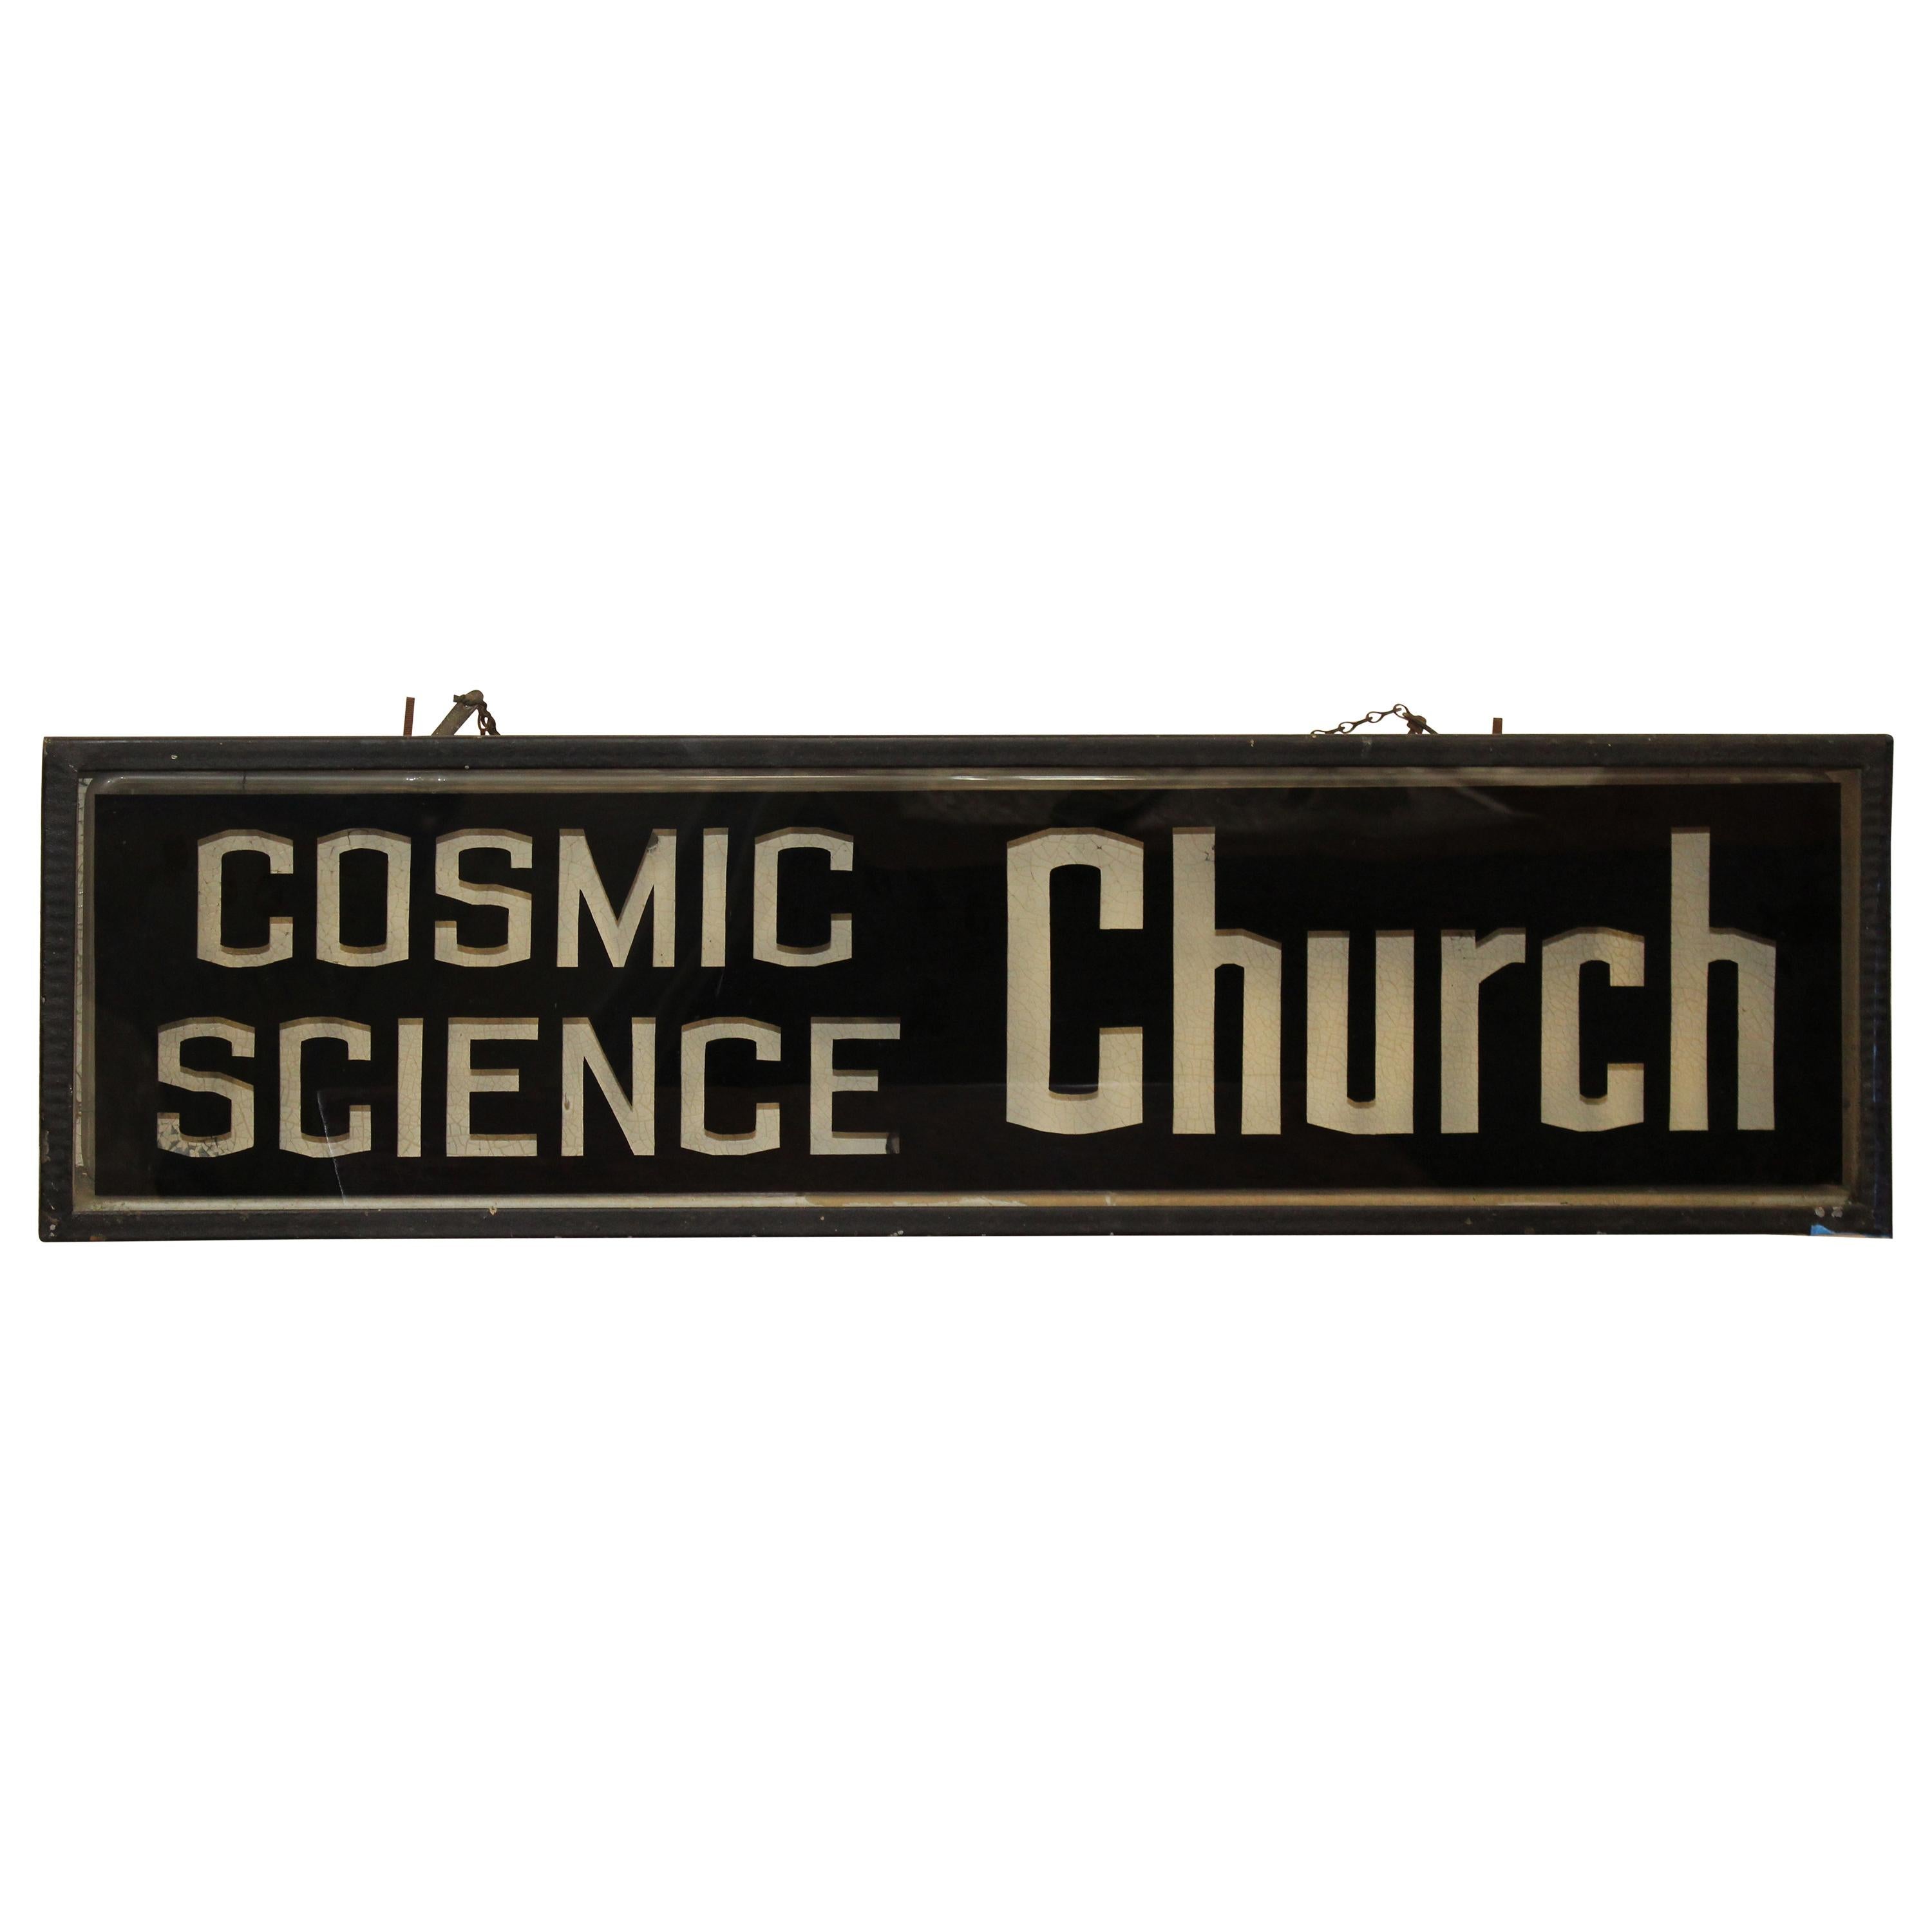 Cosmic Science Church Advertising Light Up Sign For Sale